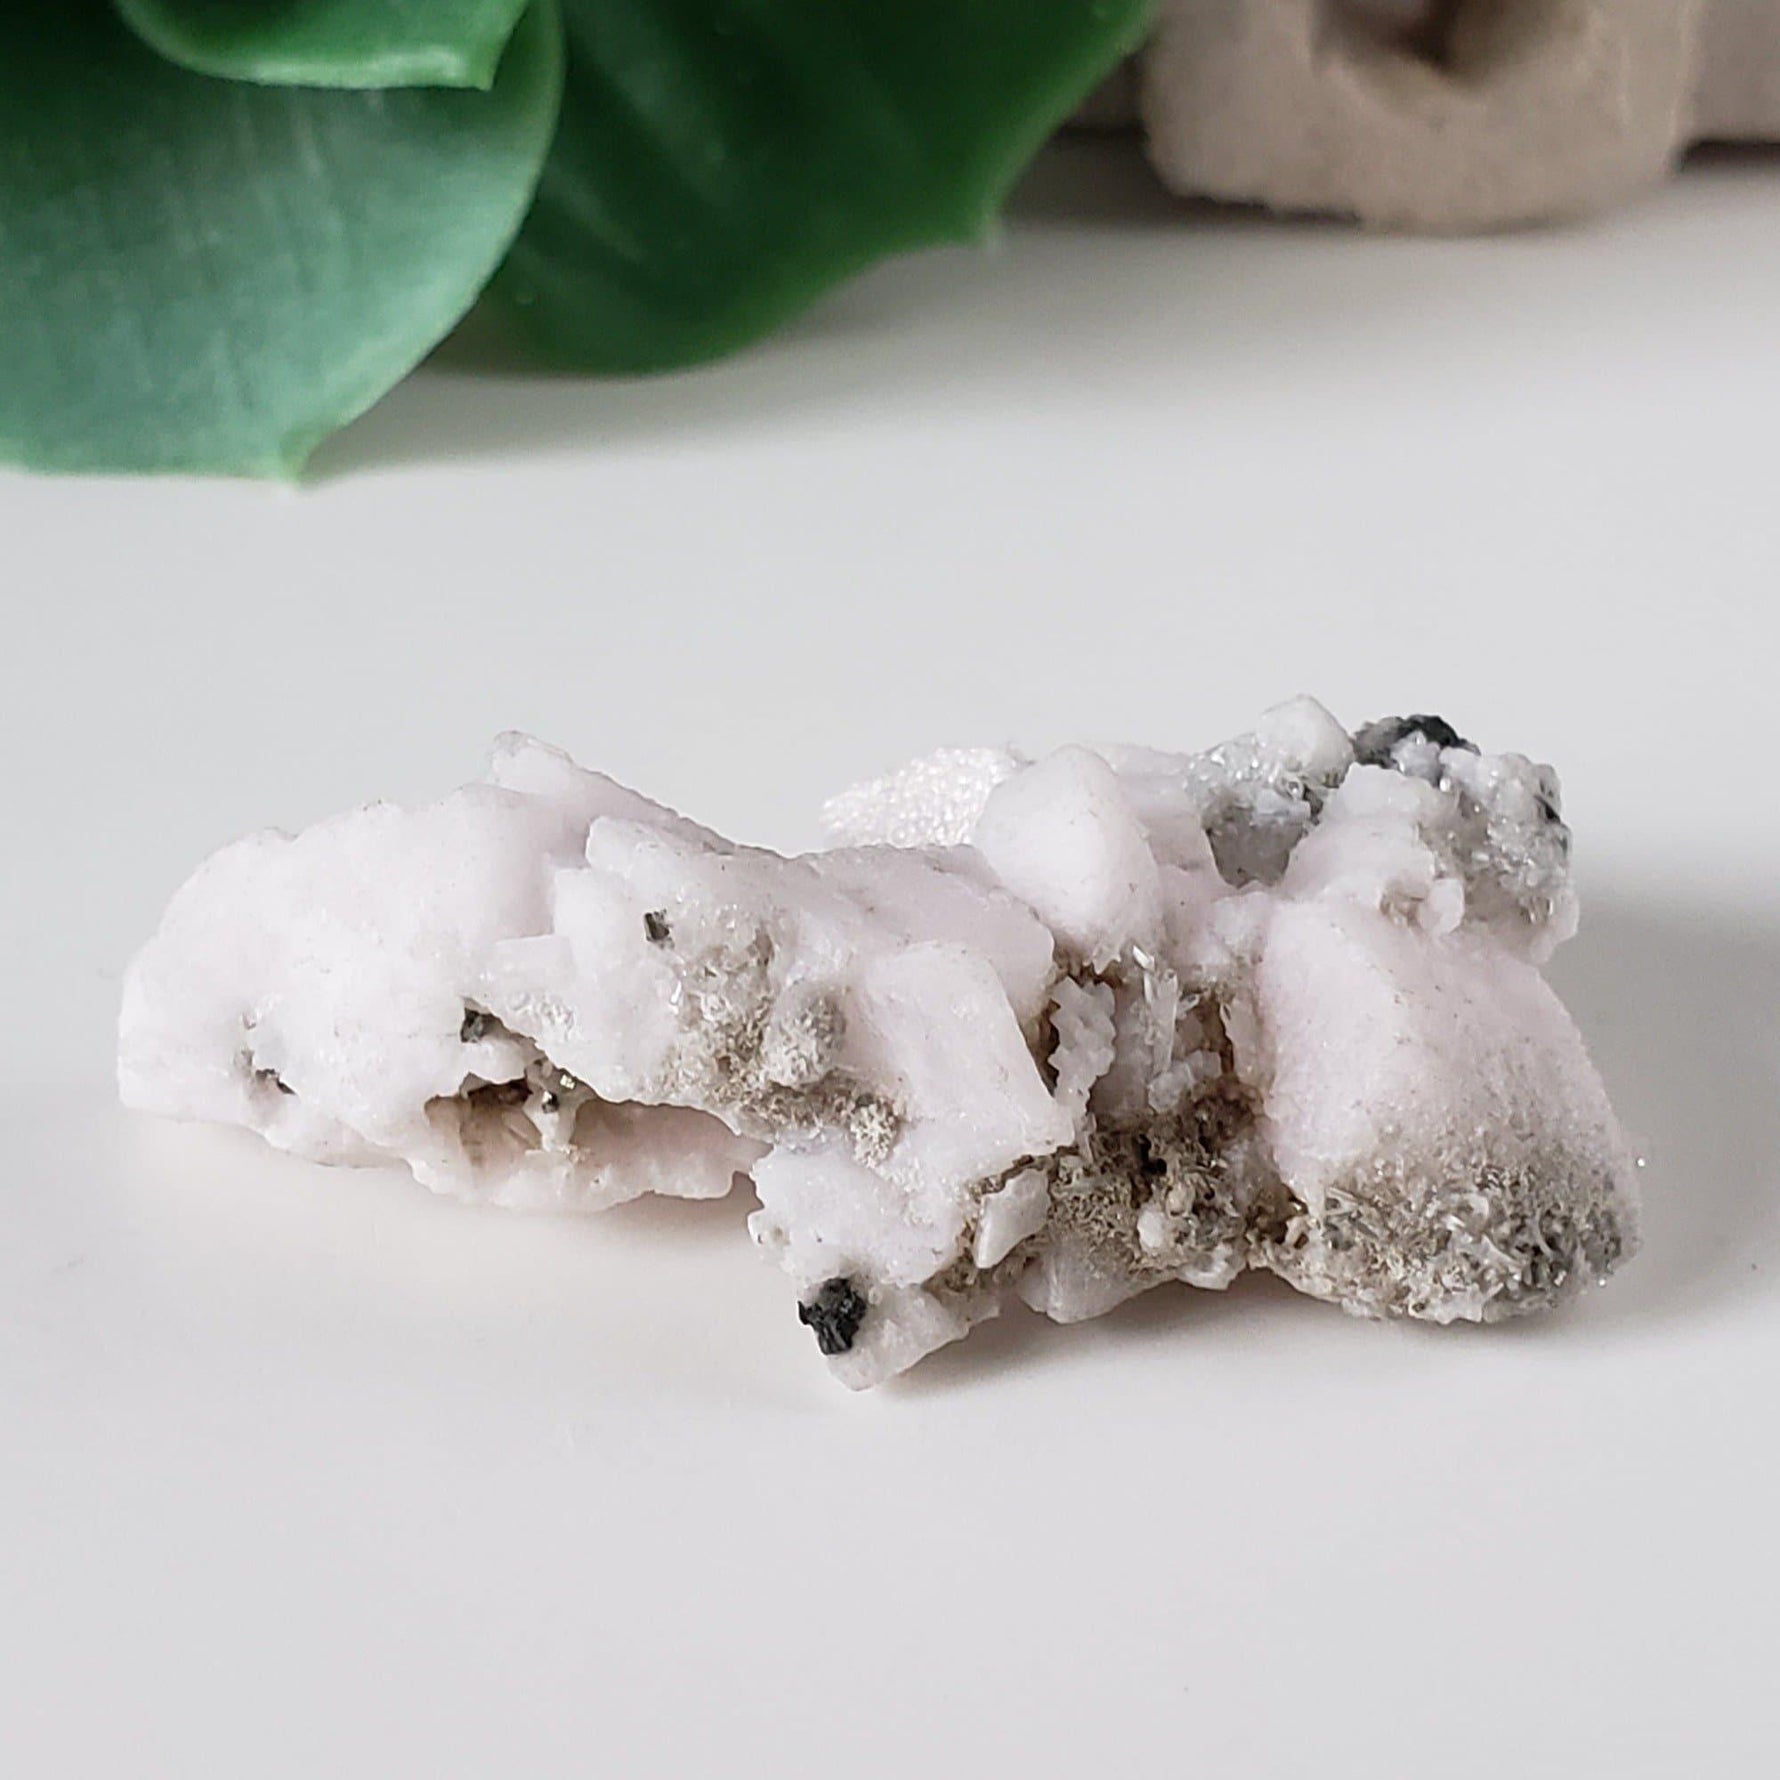 Mangano Calcite with Pyrite Crystal Cluster | 9.83 Grams | Lima, Peru